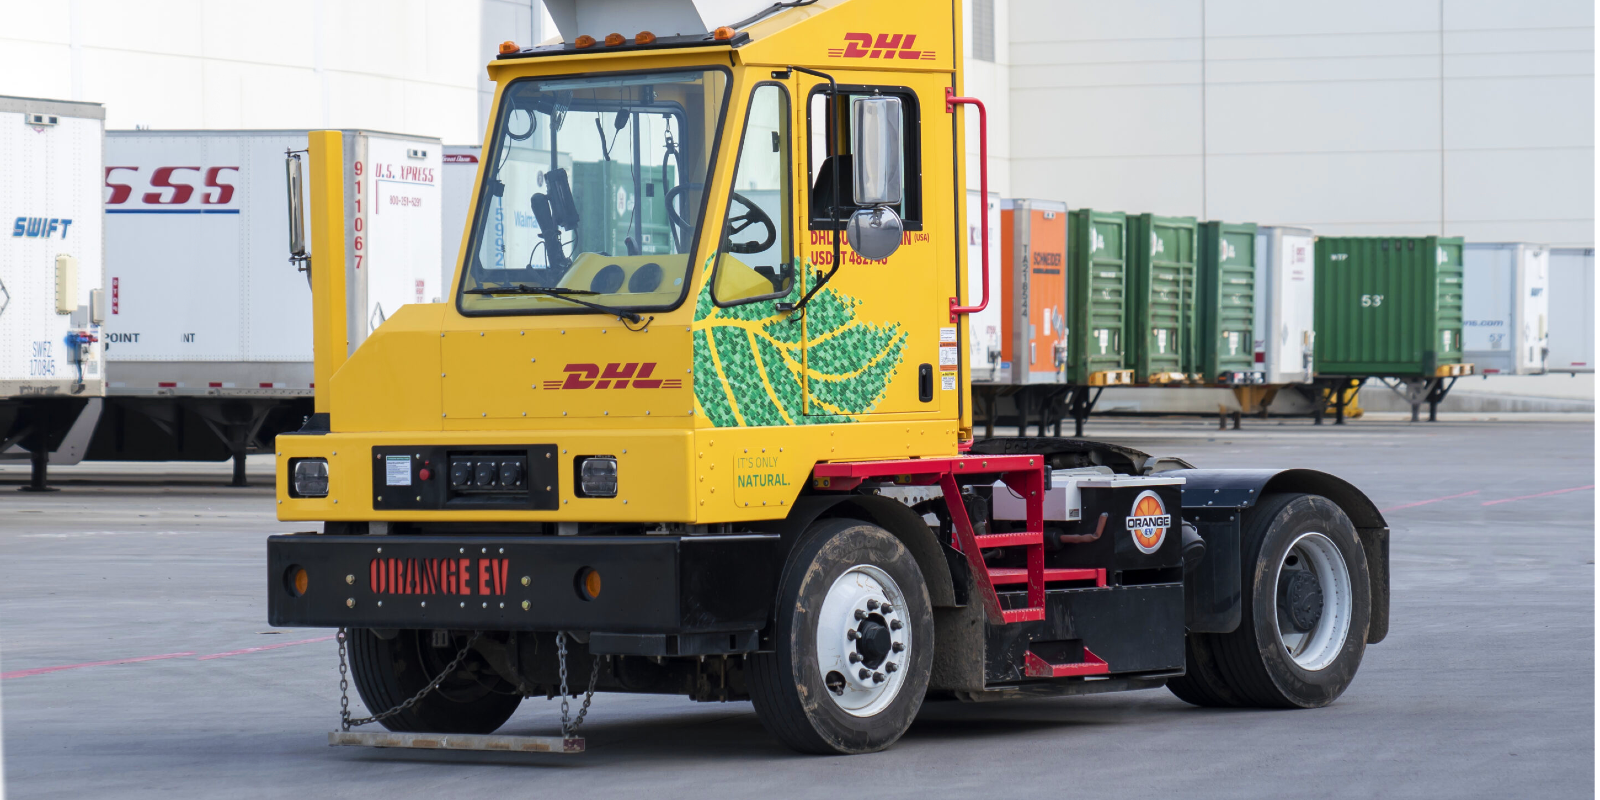 DHL reaches 50 electric truck milestone with Orange EV, plans to double down